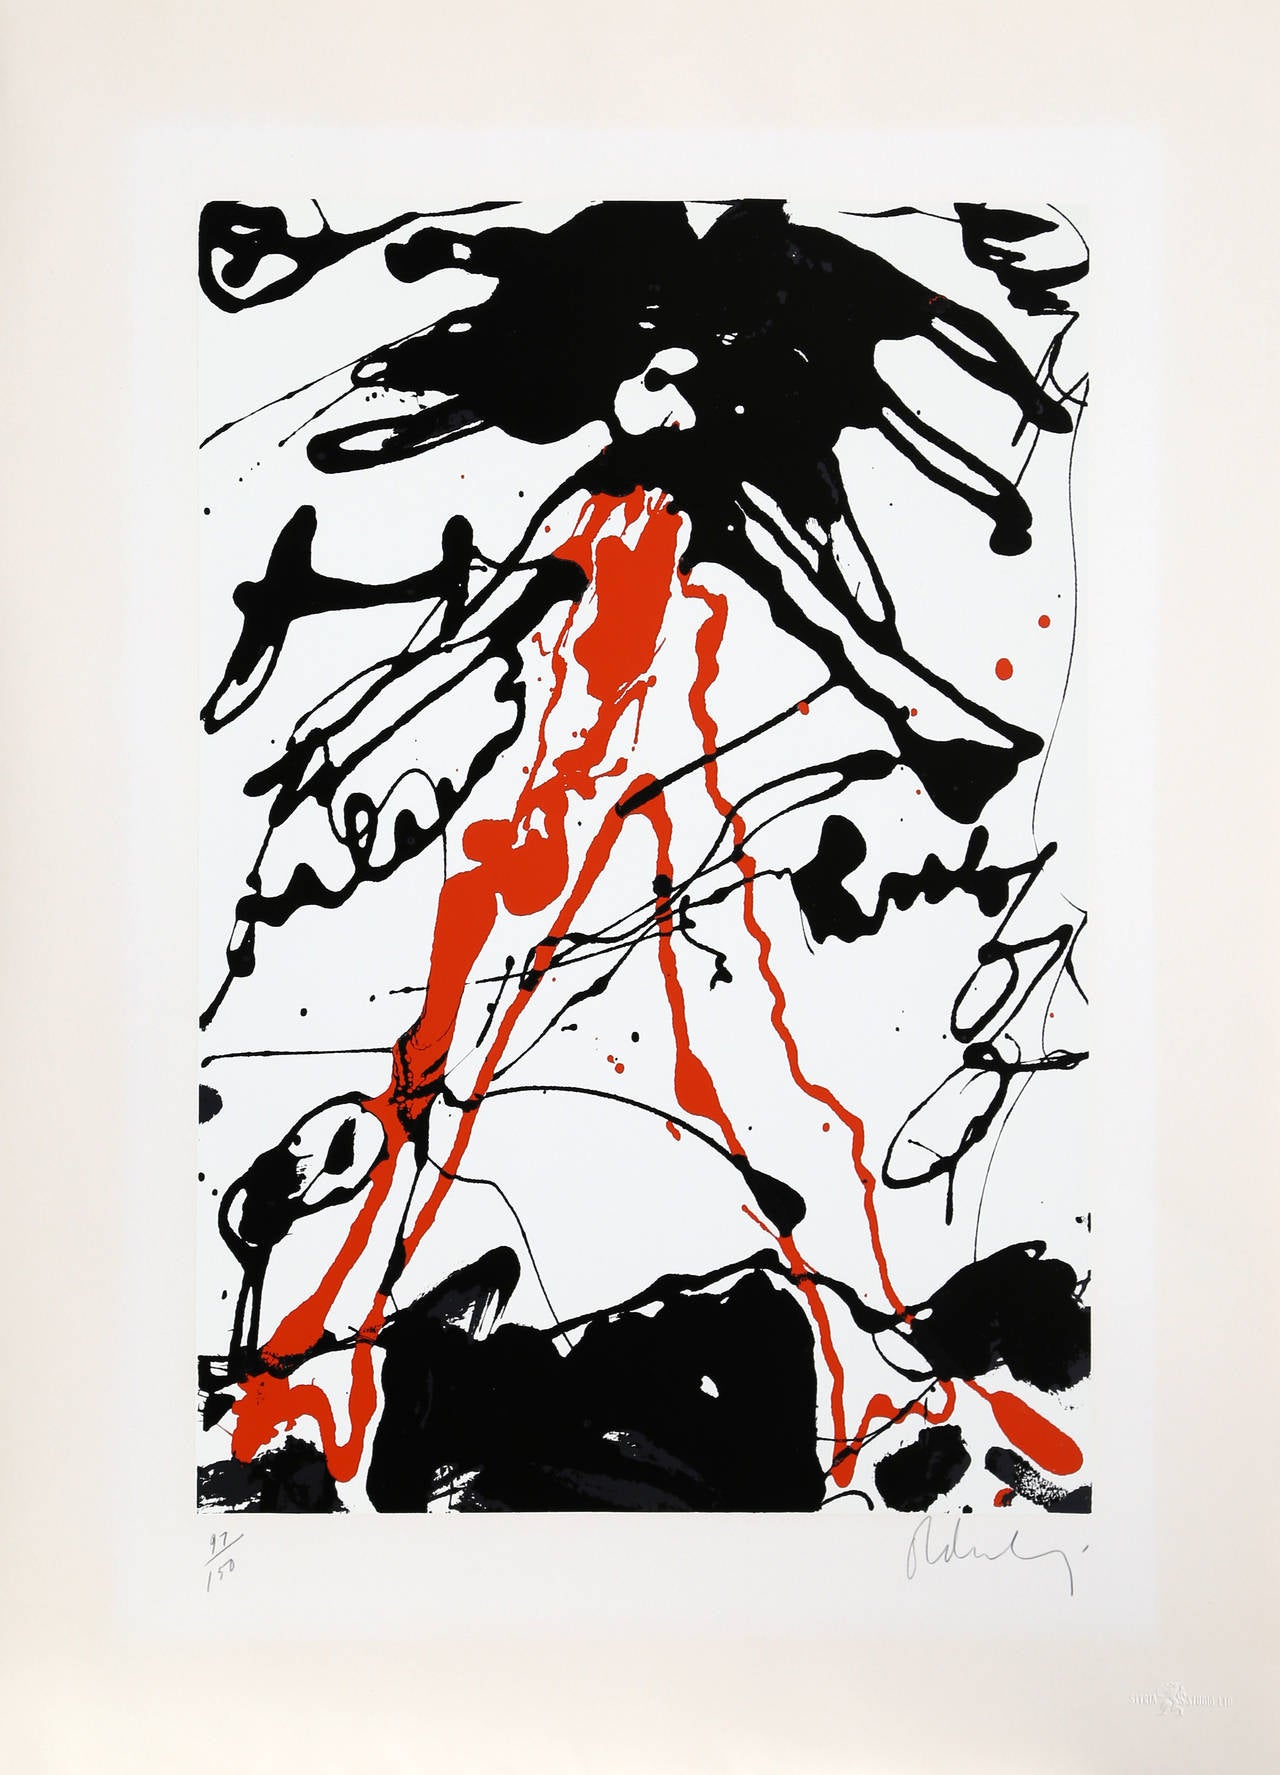 Claes Oldenburg Figurative Print - Striding Figure from Conspiracy: The Artist as Witness Portfolio